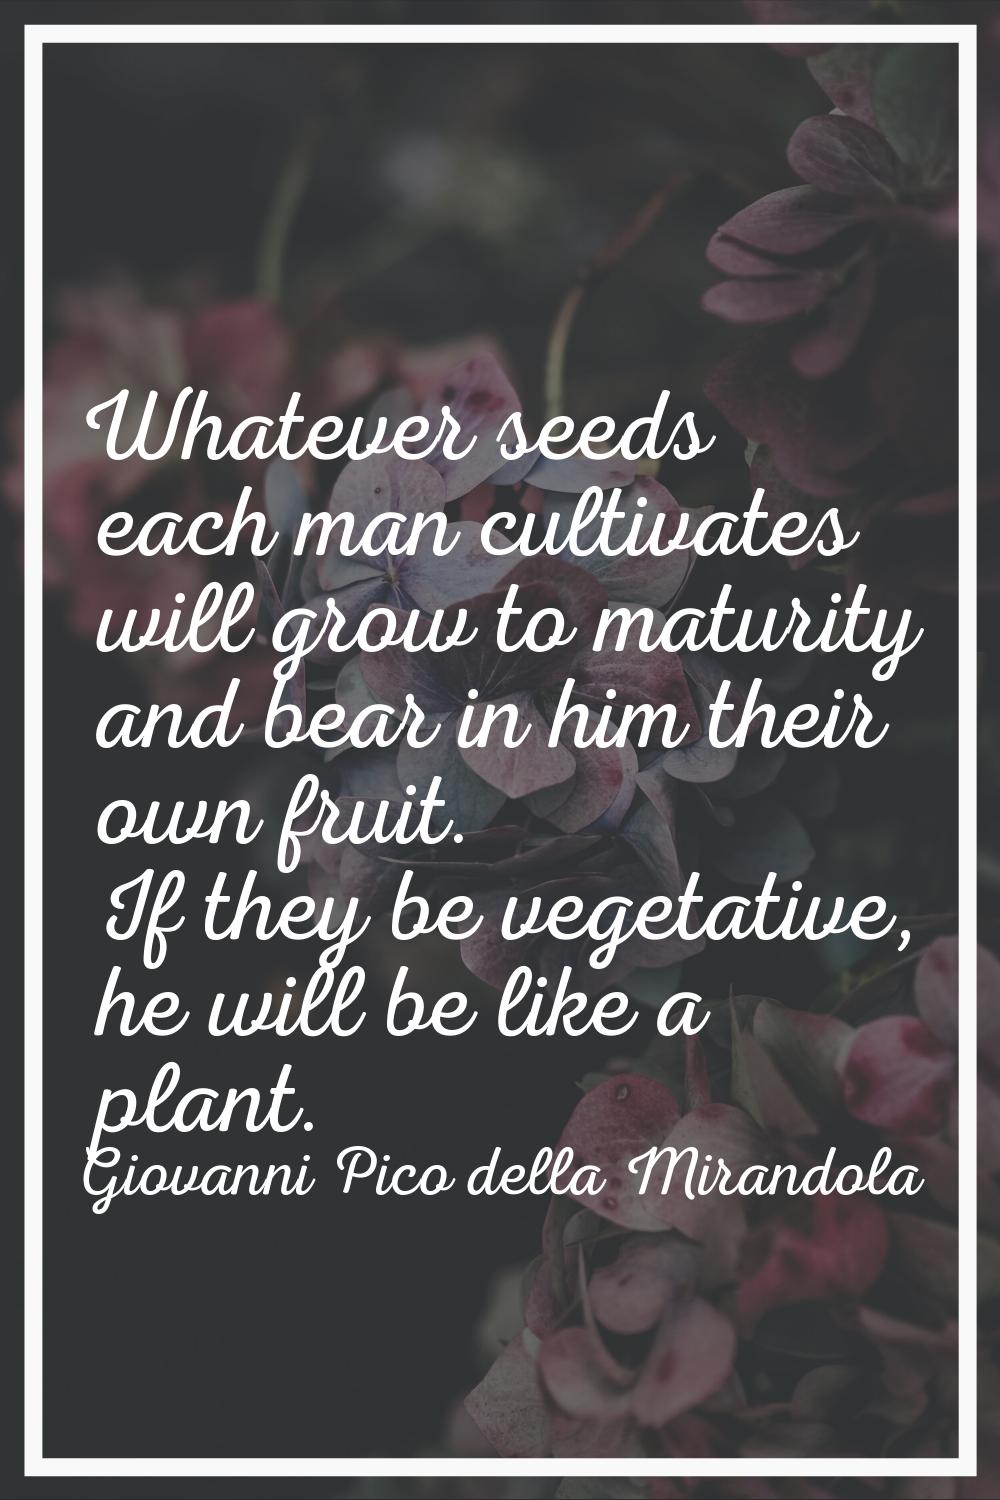 Whatever seeds each man cultivates will grow to maturity and bear in him their own fruit. If they b